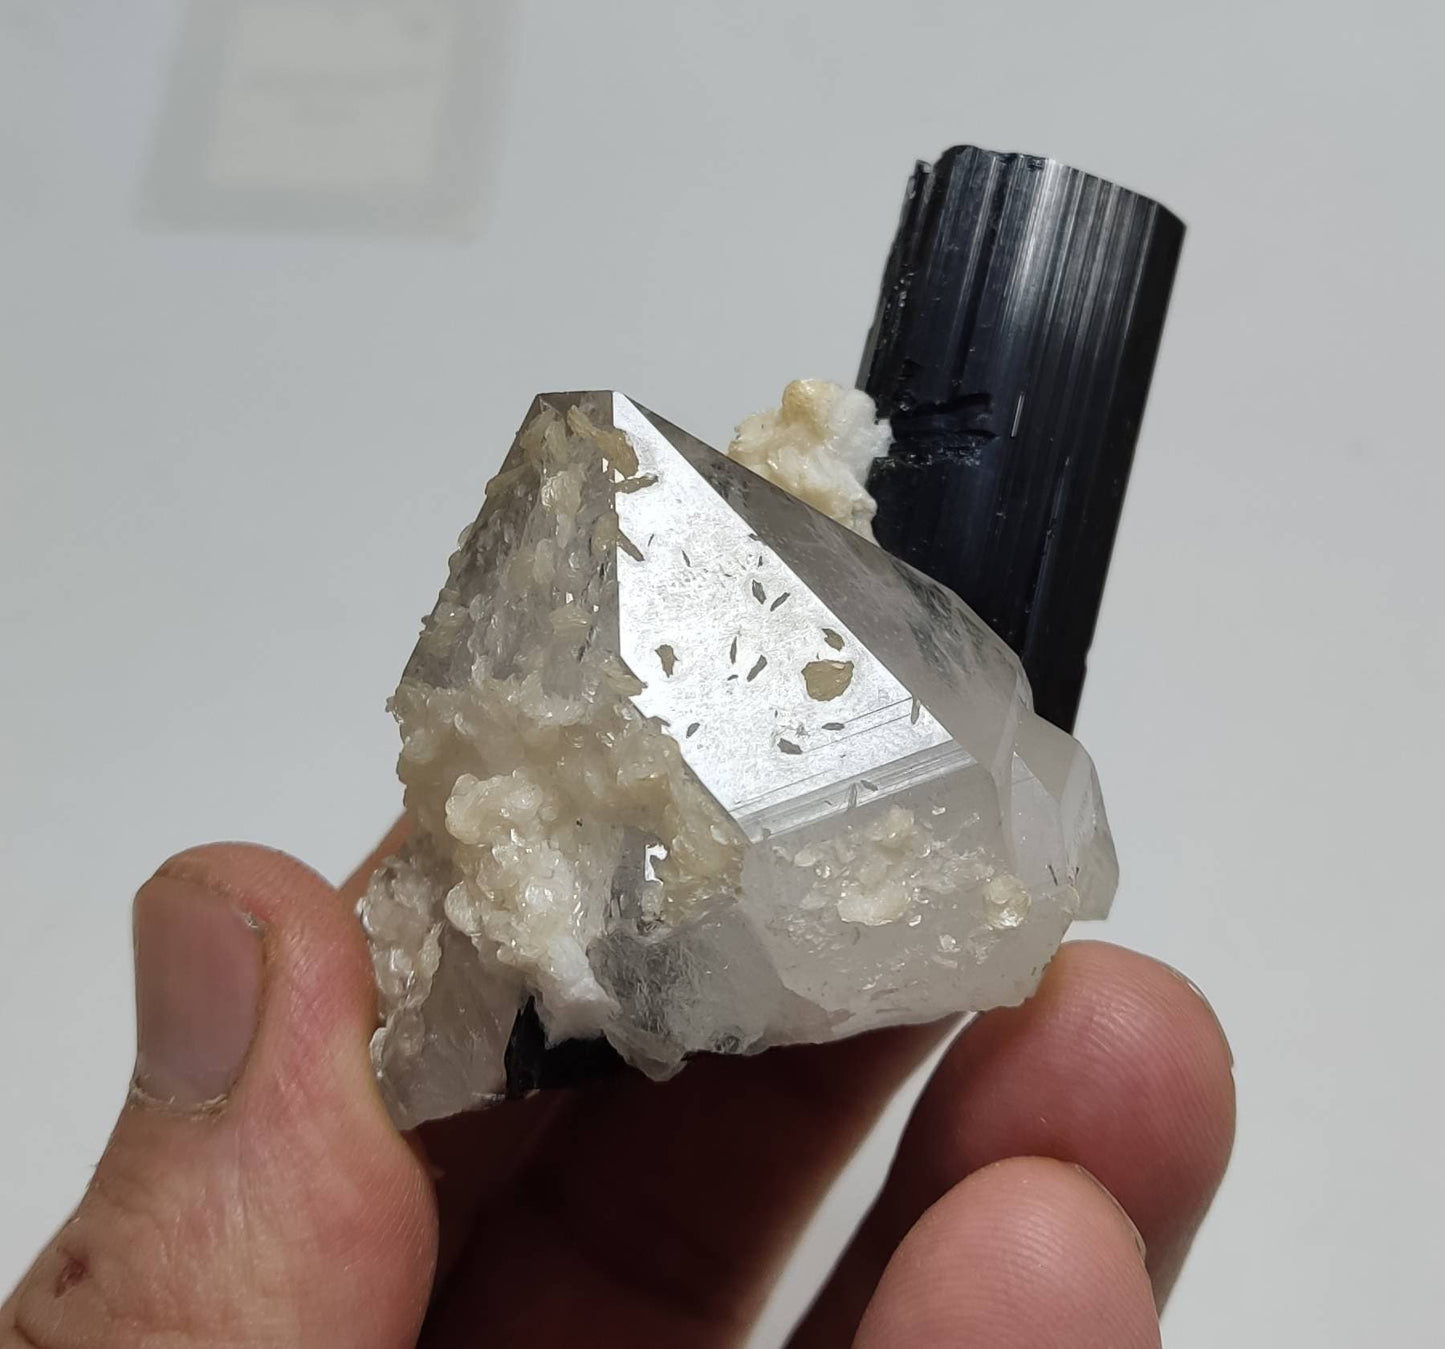 An amazing beautifully terminated specimen of Tourmalines crystals with terminated Quartz crystal and some albite  108 grams